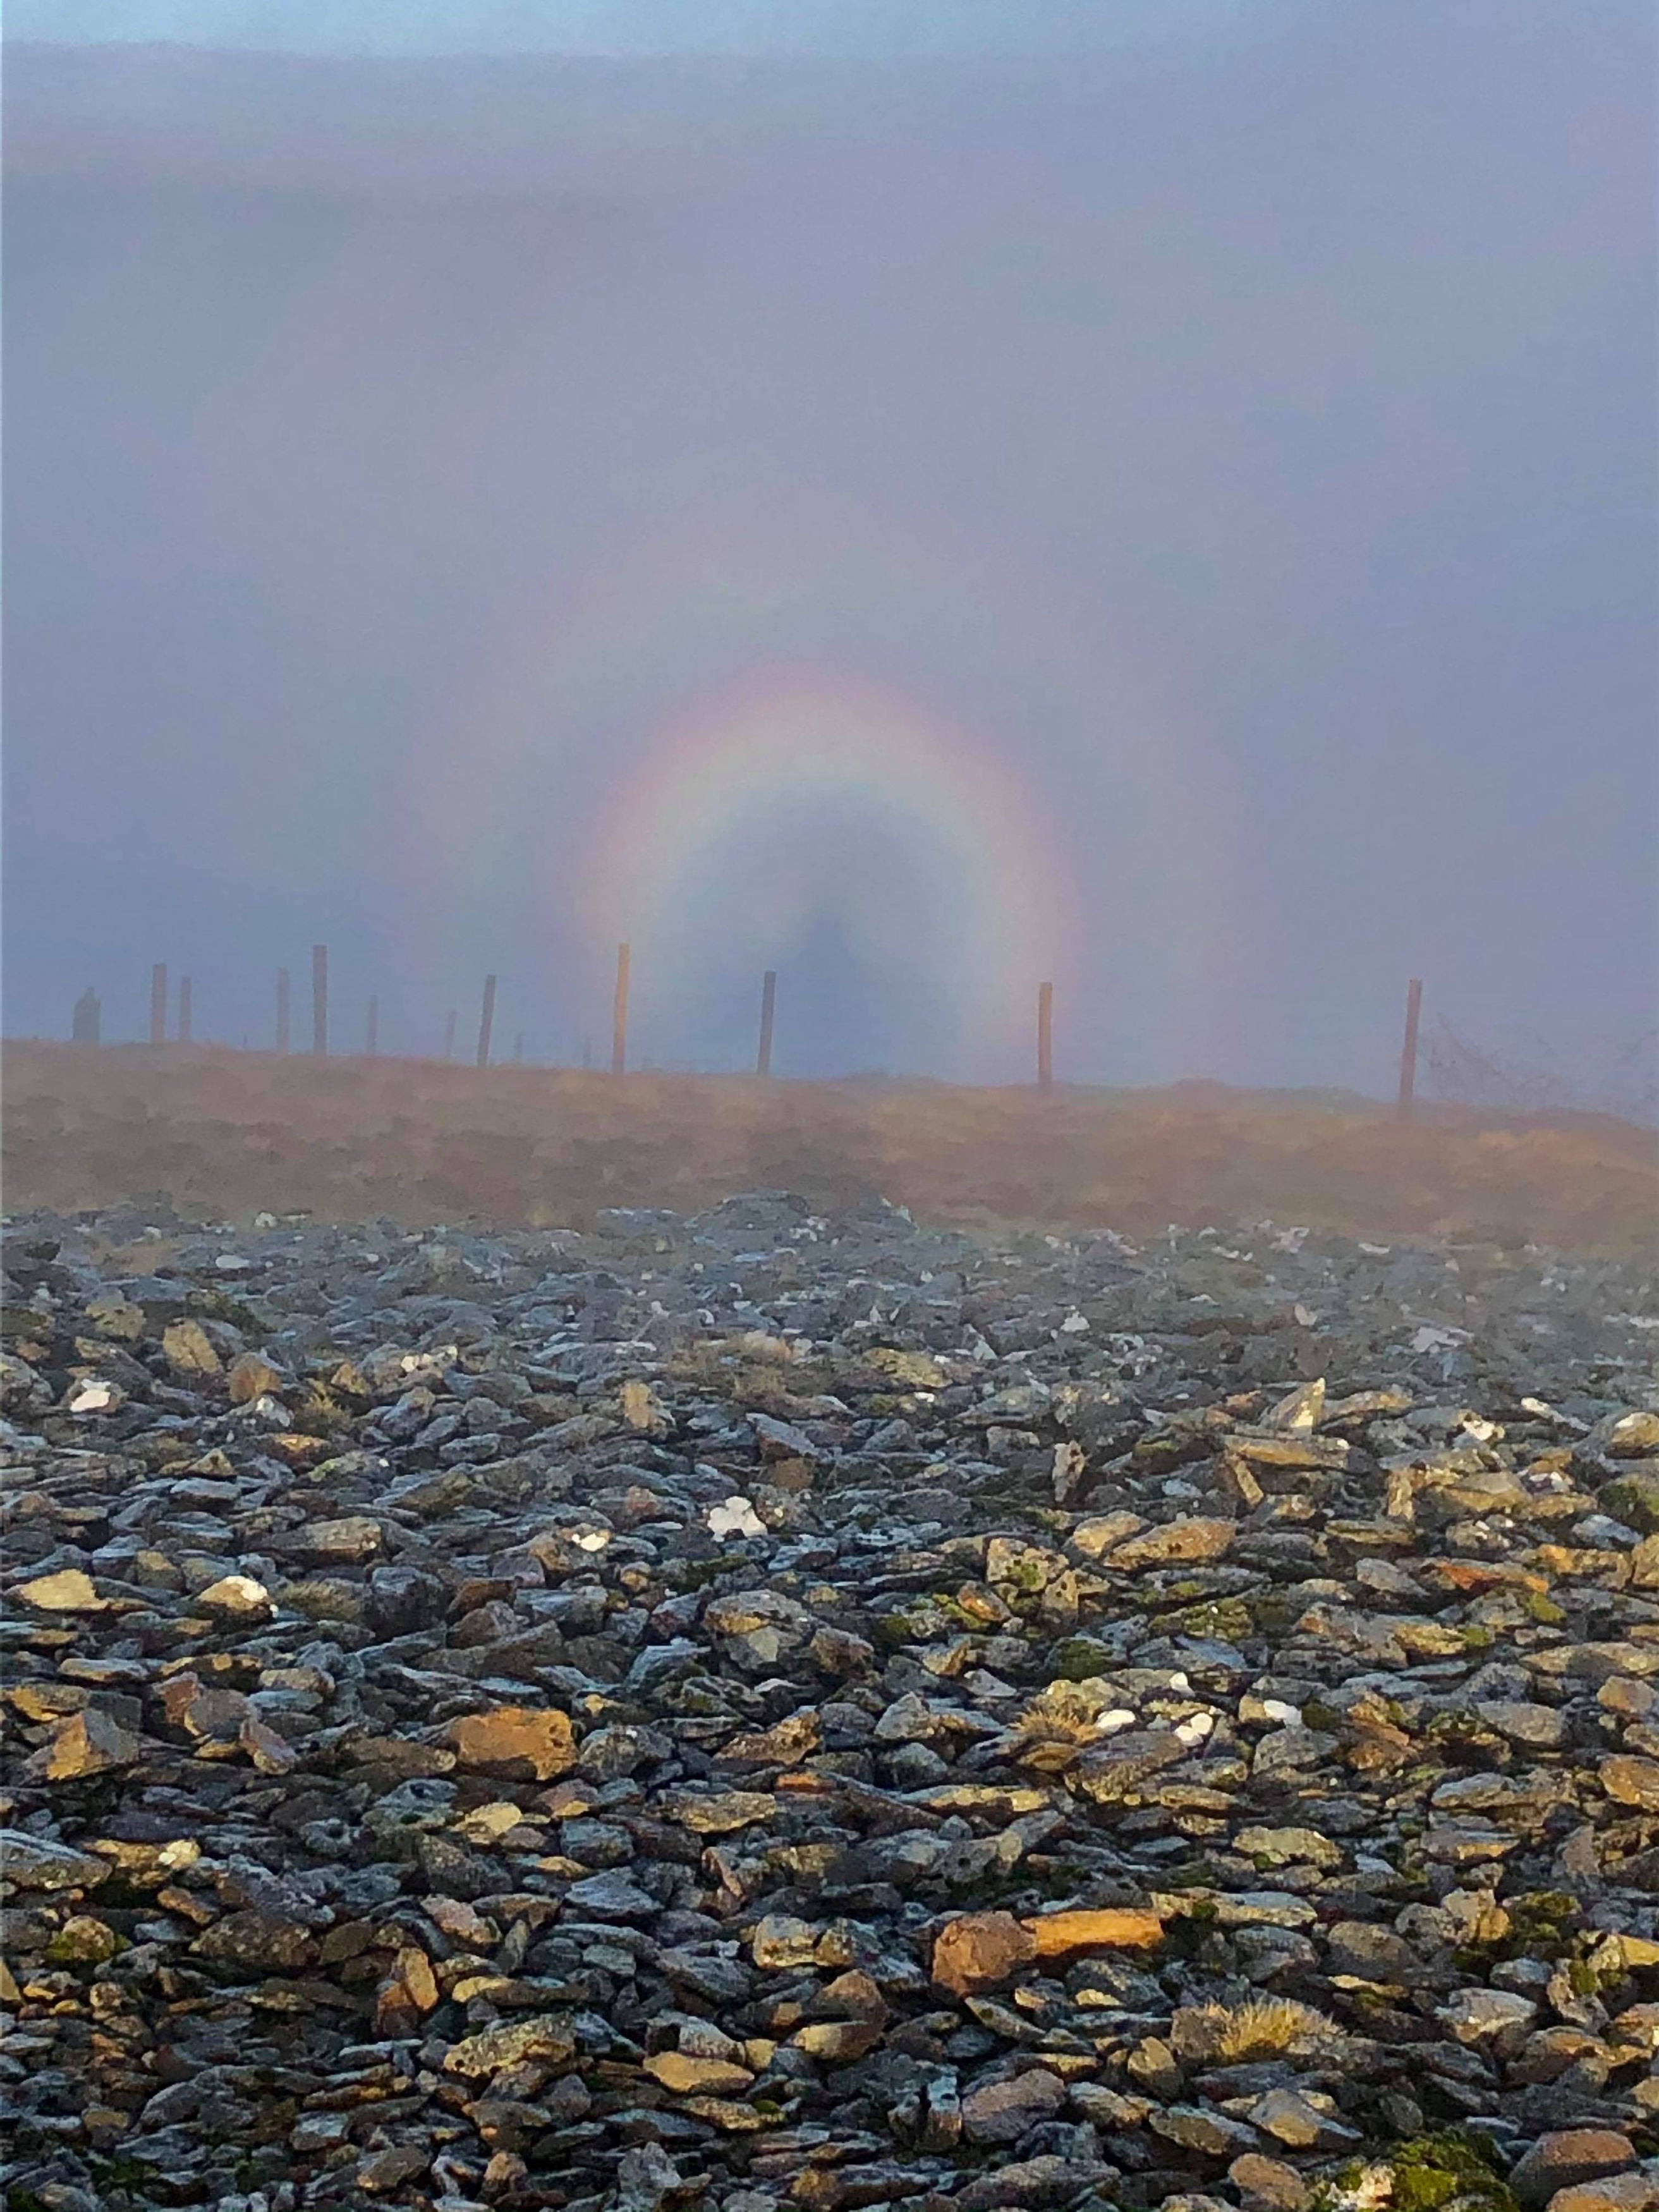 Hiker witnessed the weather event while hiking in Snowdonia